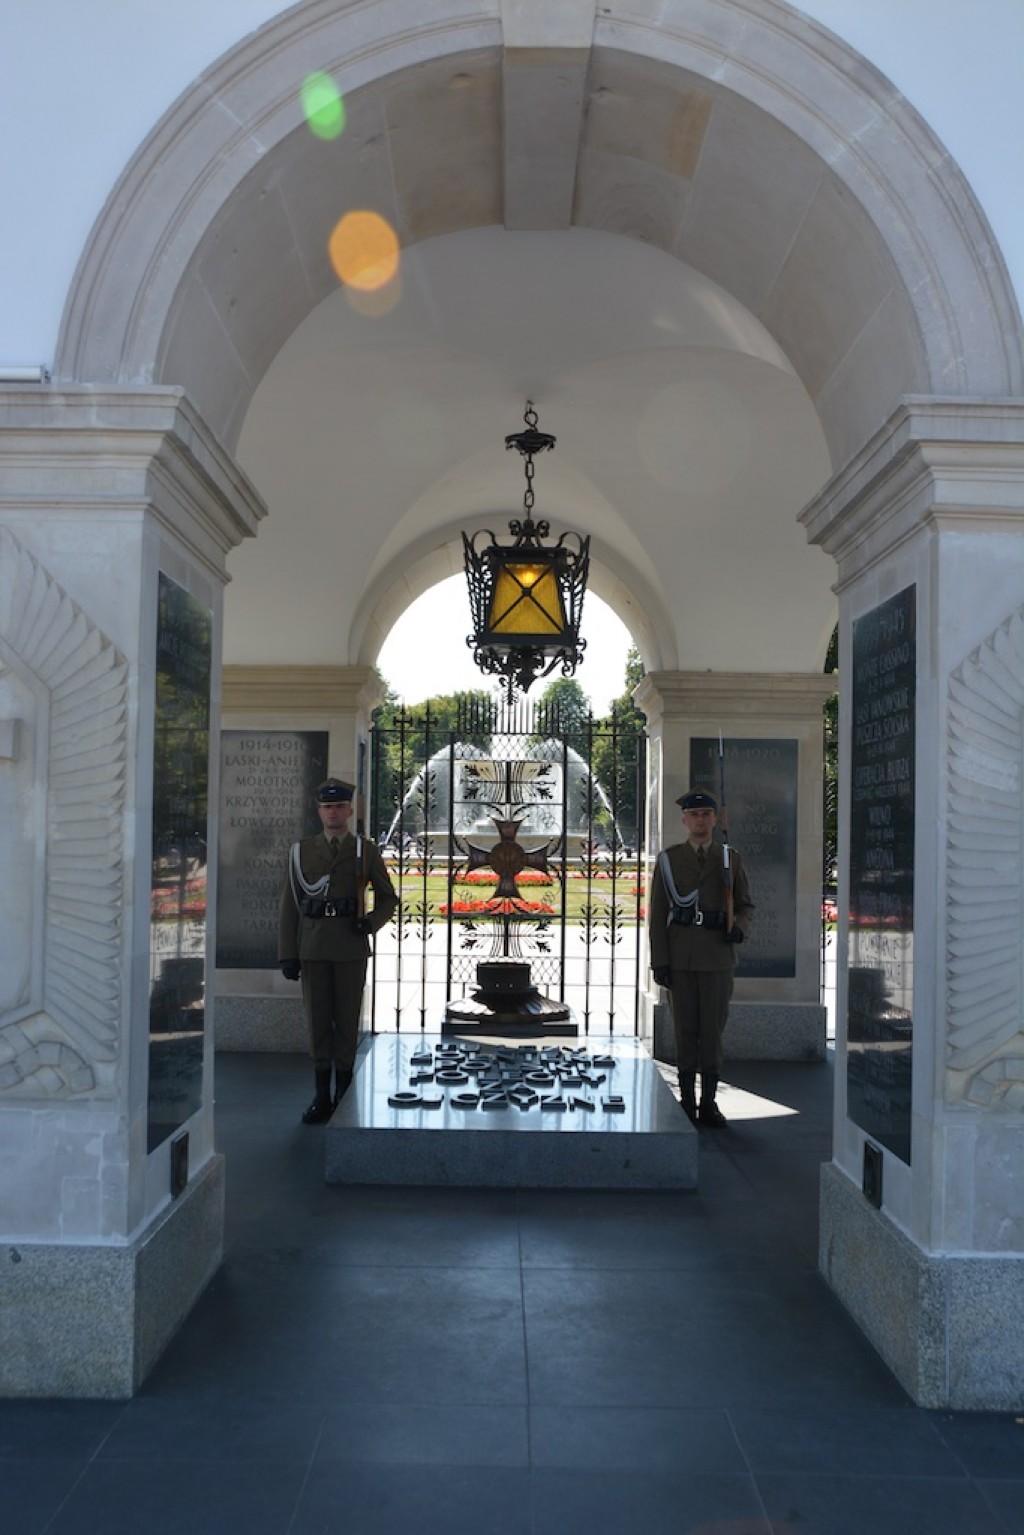 The tomb of the unknown soldier
